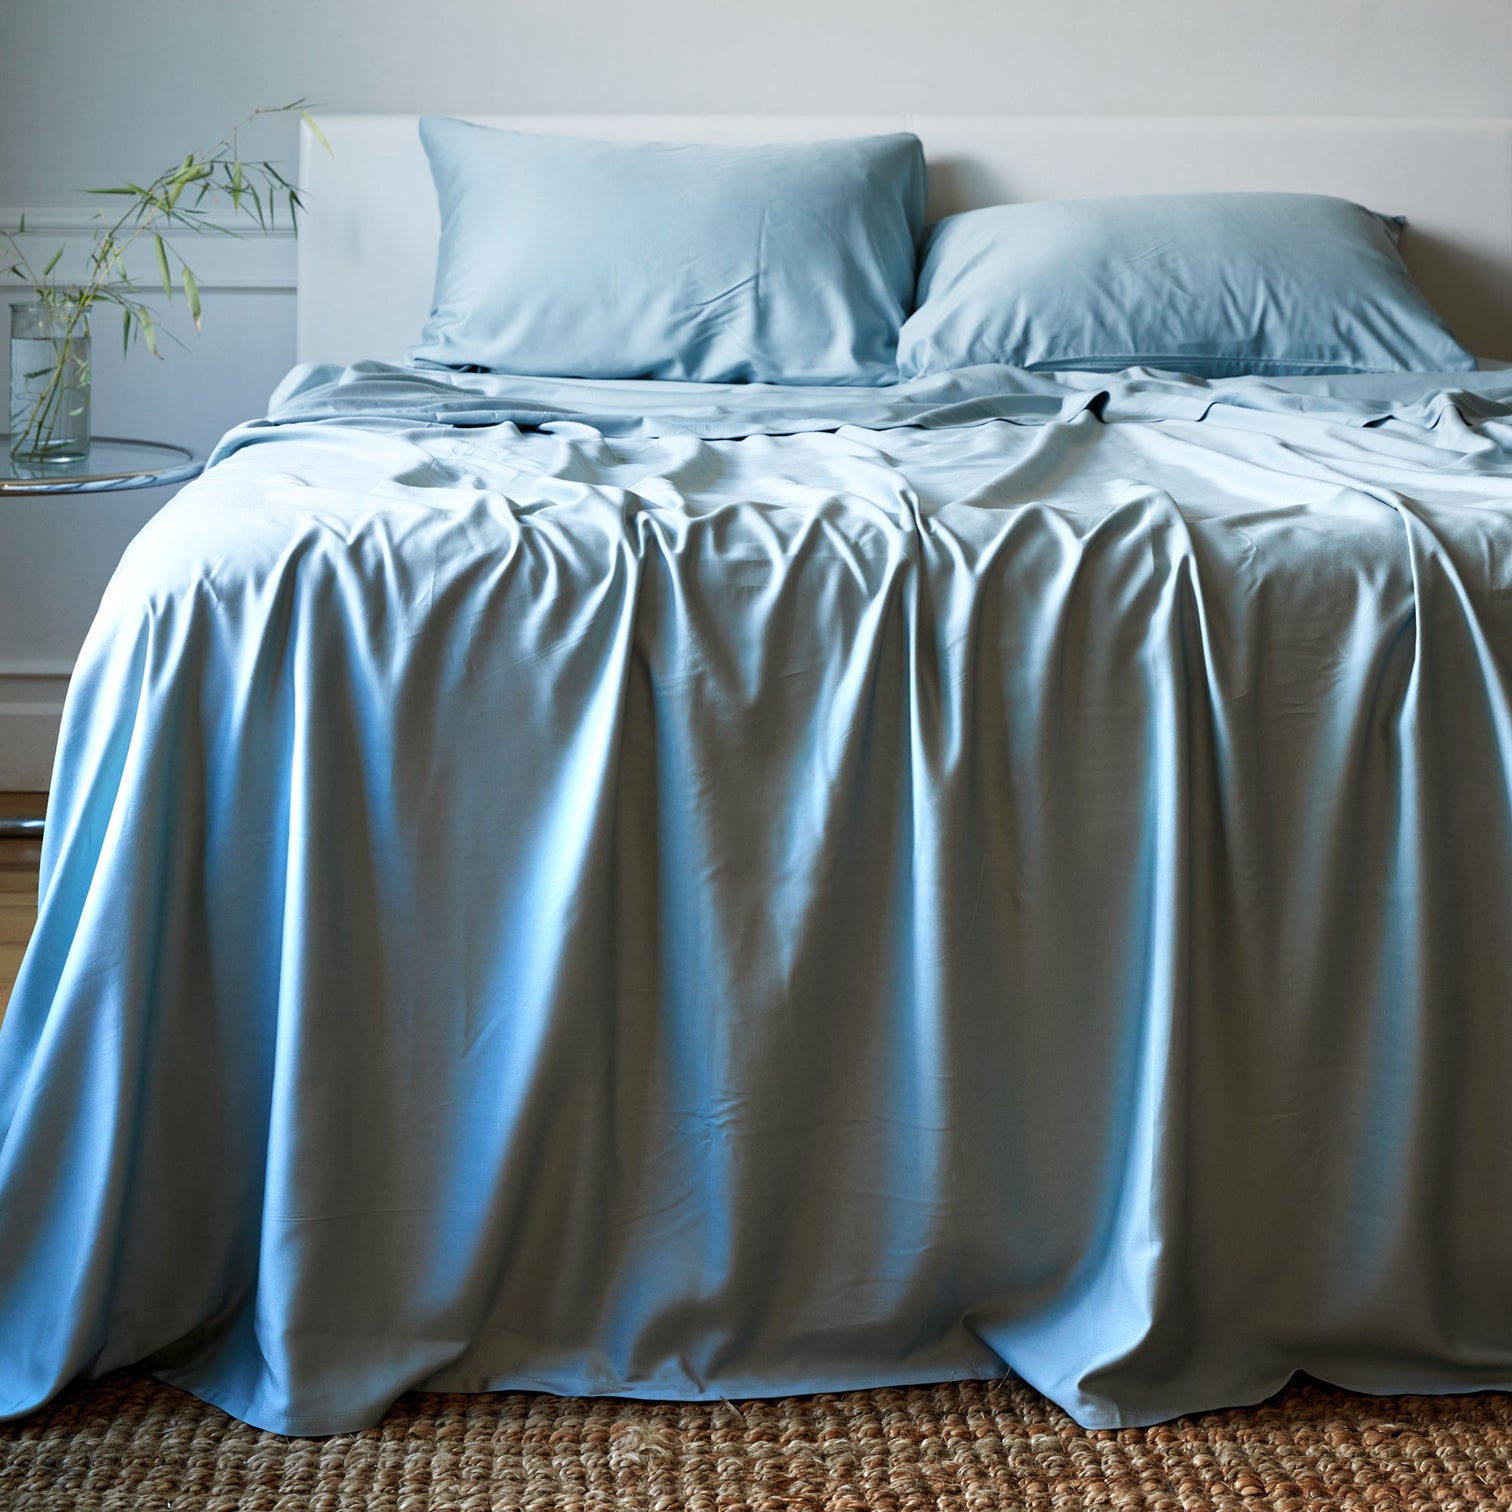 BedVoyage | Shop the Luxurious Bamboo Bedding,Towels & Home Essentials